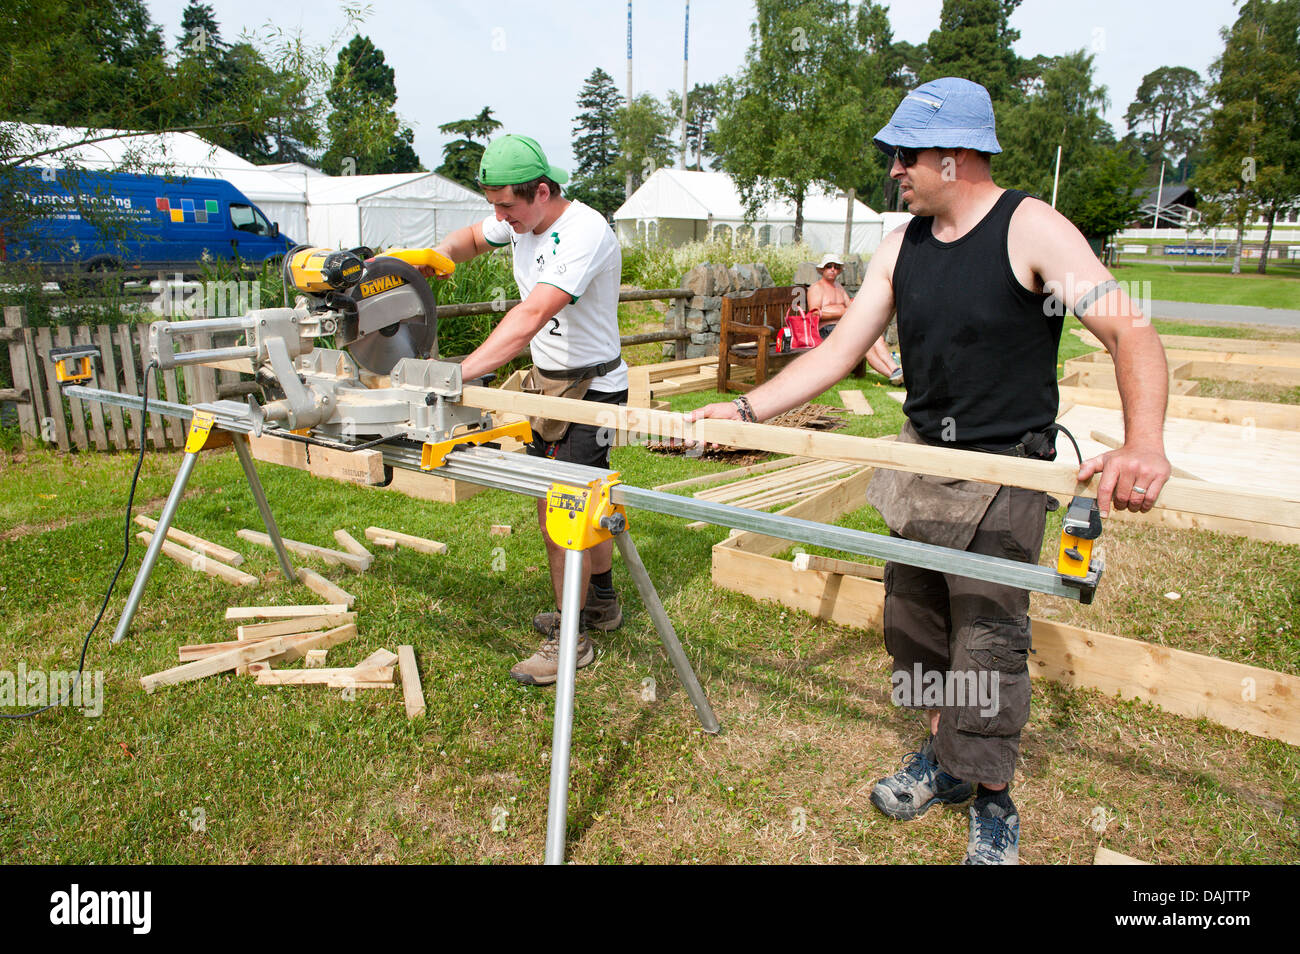 Builth Wells, Mid Wales, UK. 15th July 2013. Workmen prepare timber framed buildings. Workmen preparing The Royal Wesh Showground for the start of biggest Agricultural show in Britain next Monday 22nd July 2013 find the heat heavy going as temperatures remain above 30 degrees celsius. Photo credit: Graham M. Lawrence/Alamy Live News. Stock Photo